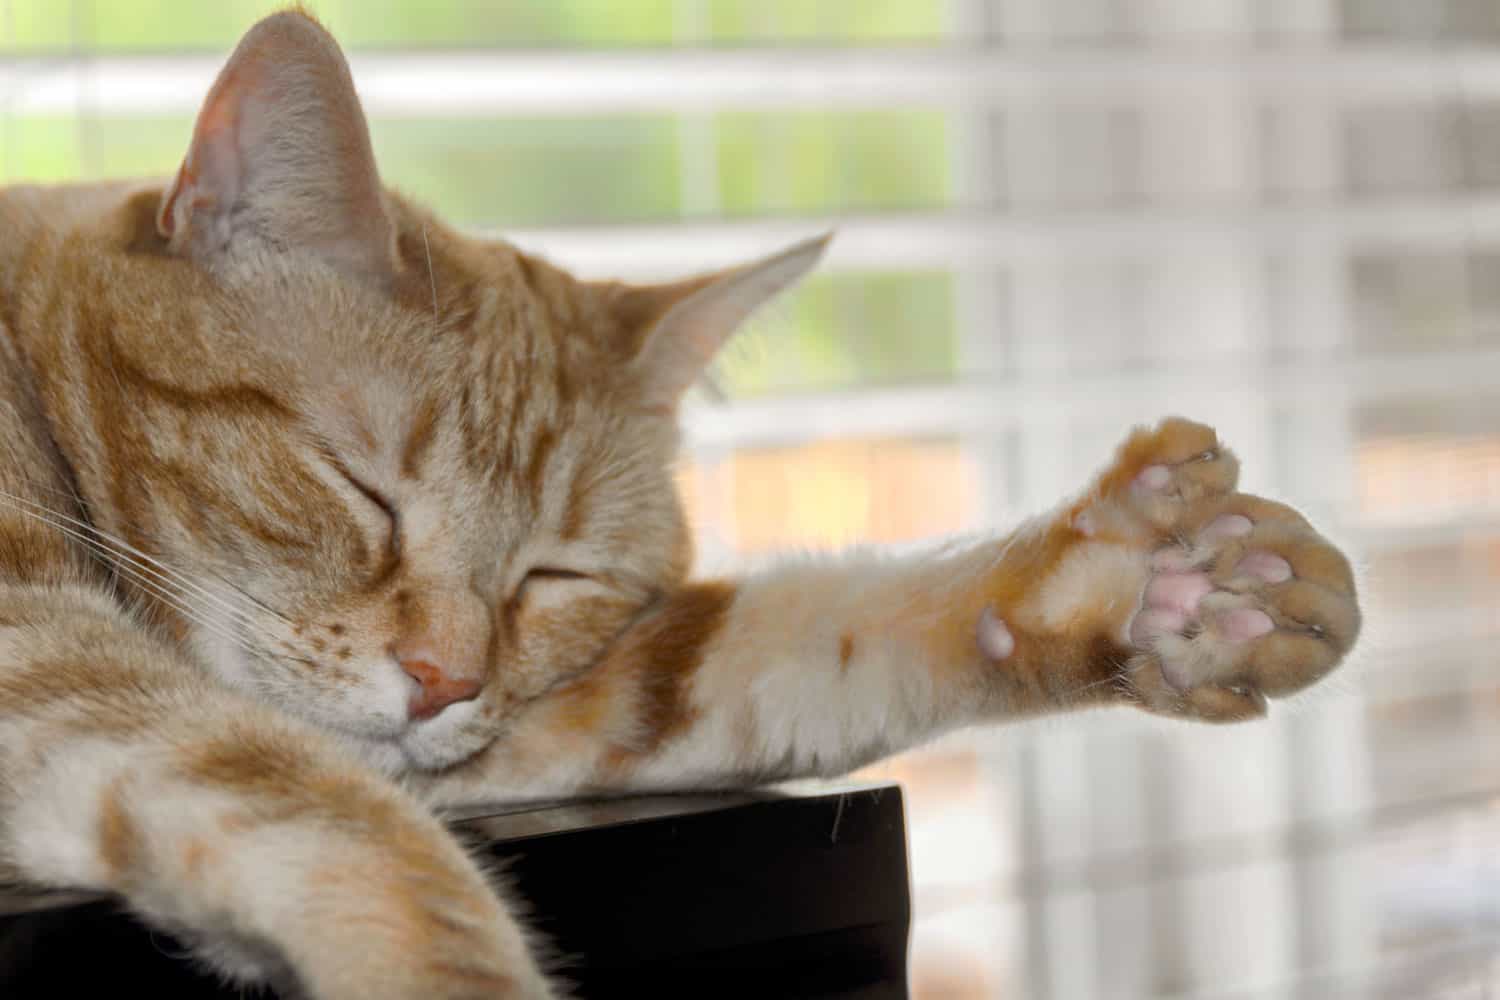 A sleeping cat with a polydactyl hand